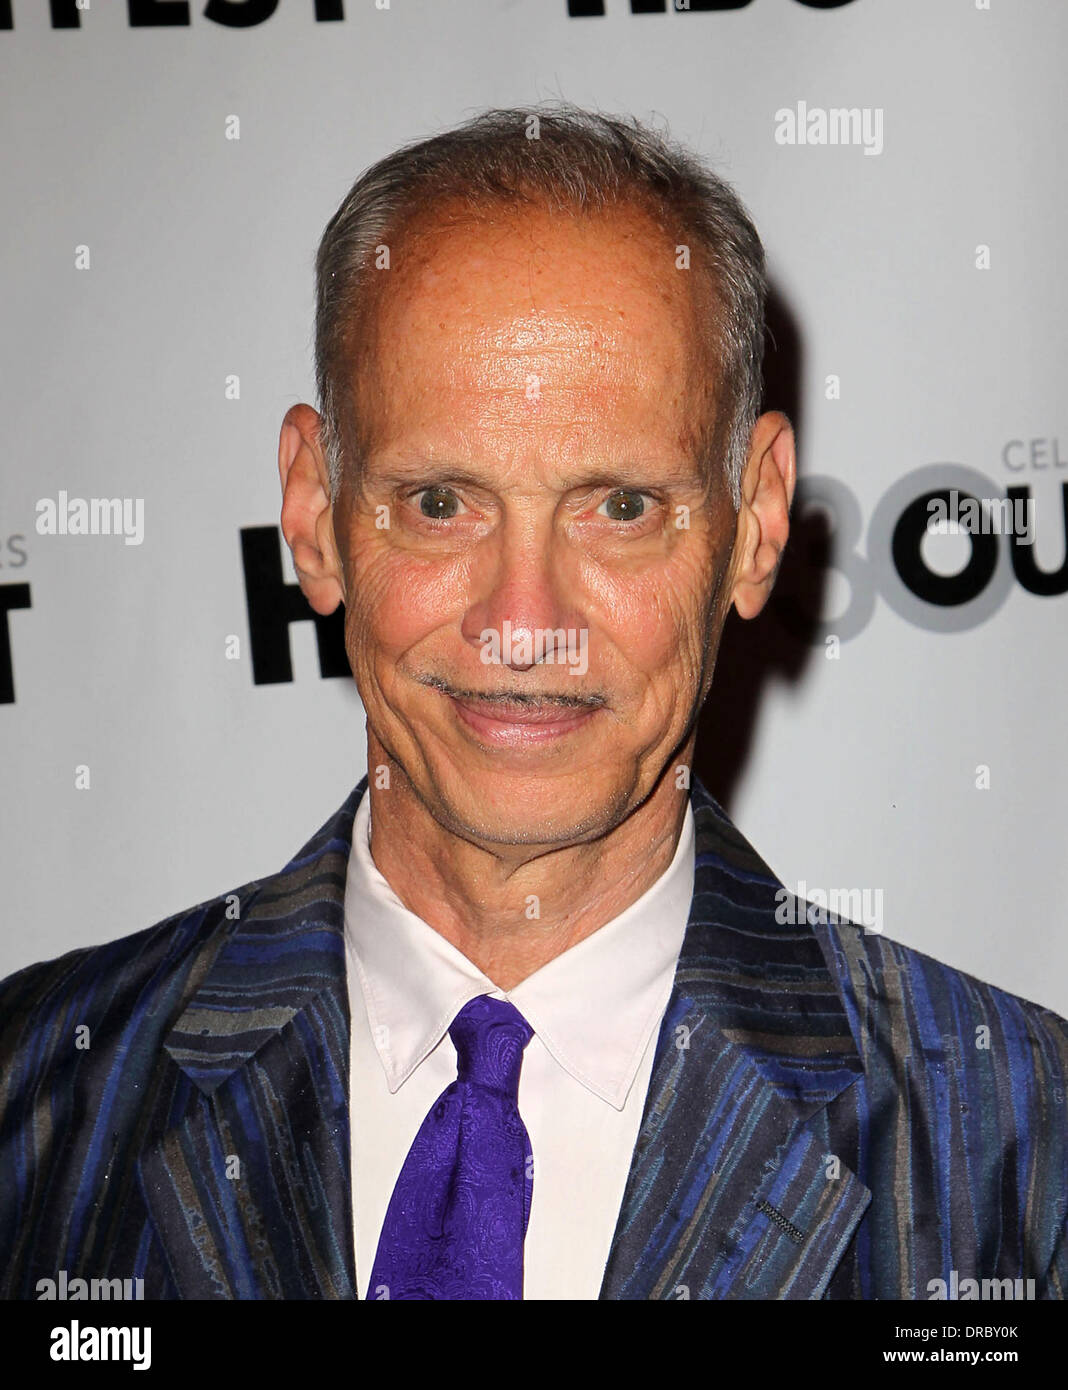 John Waters The 2012 Outfest Opening Night Gala screening of 'Vito' held at The Orpheum Theatre Los Angeles, California - 12.07.12 Stock Photo